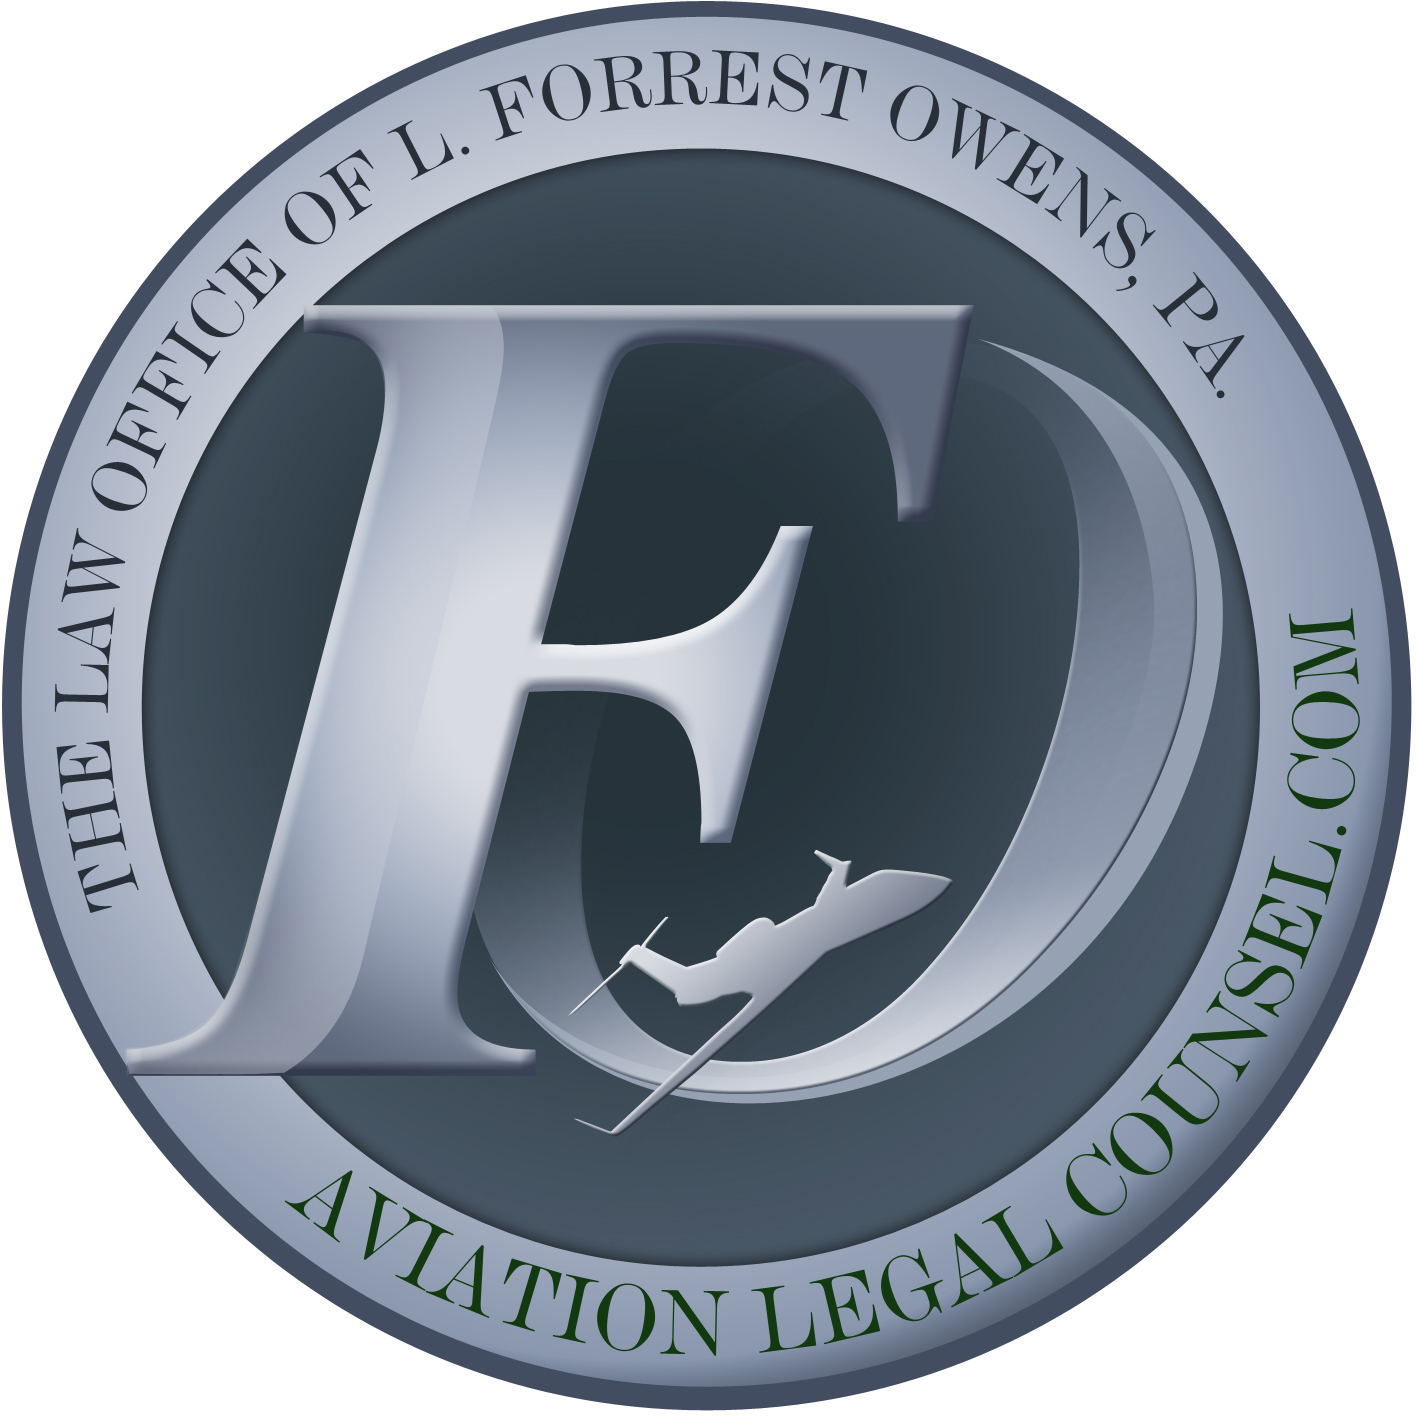 Aviation Legal Counsel logo